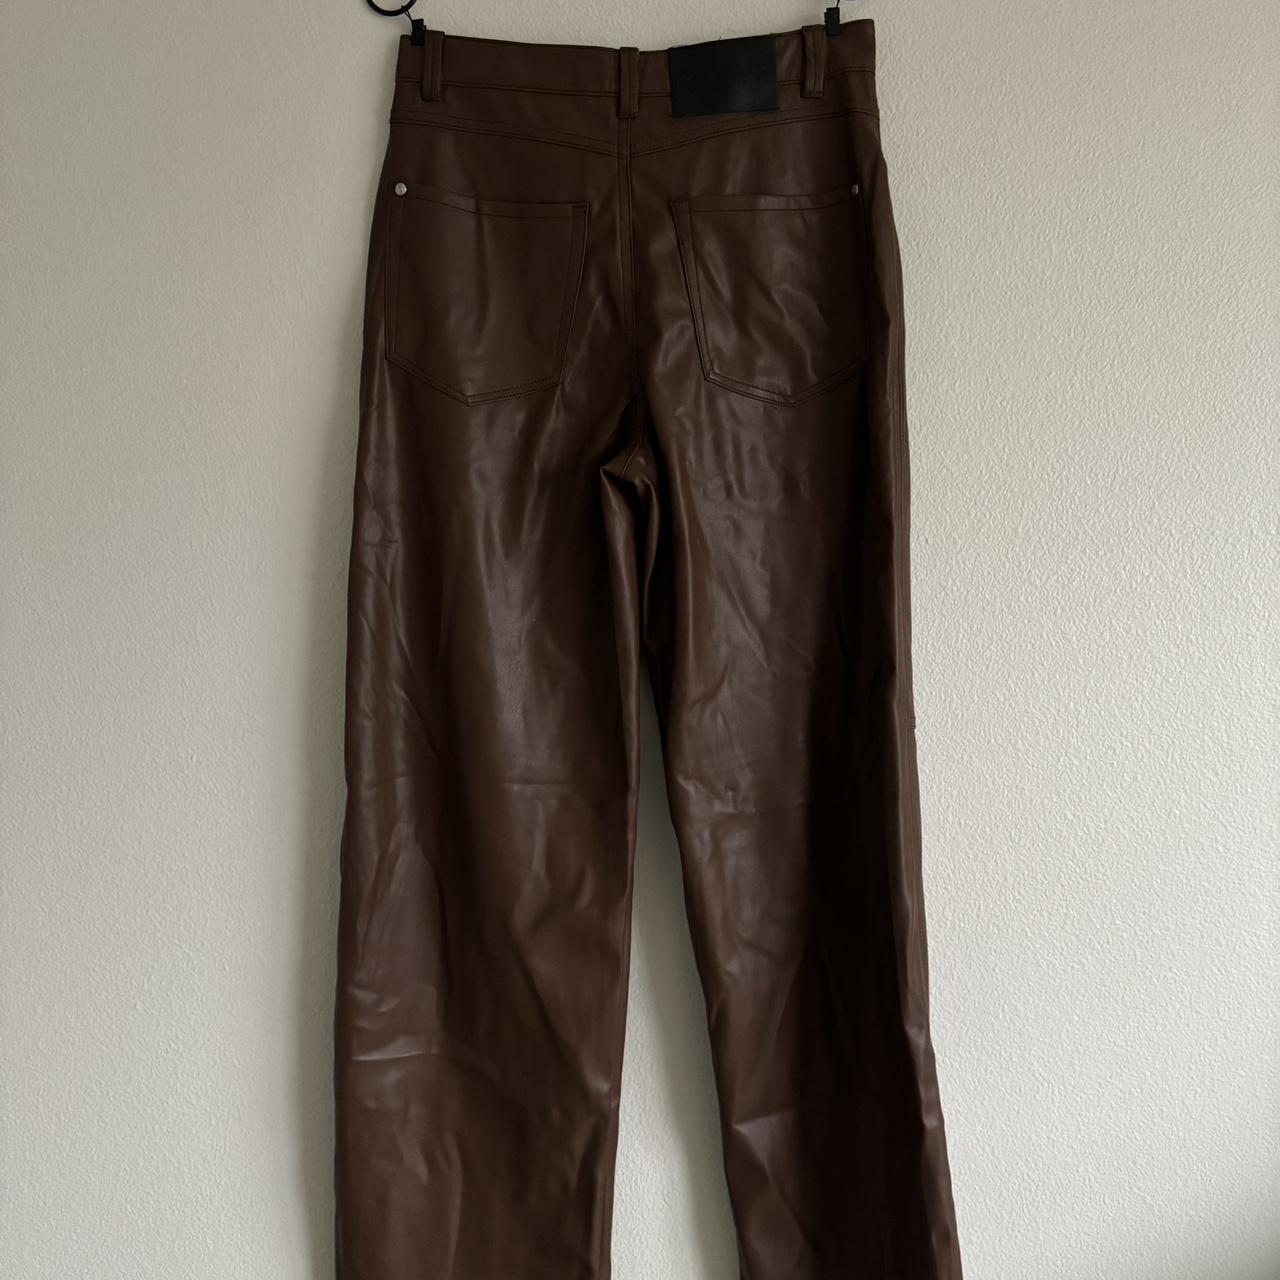 Brown faux leather pants with slits at the bottom of - Depop